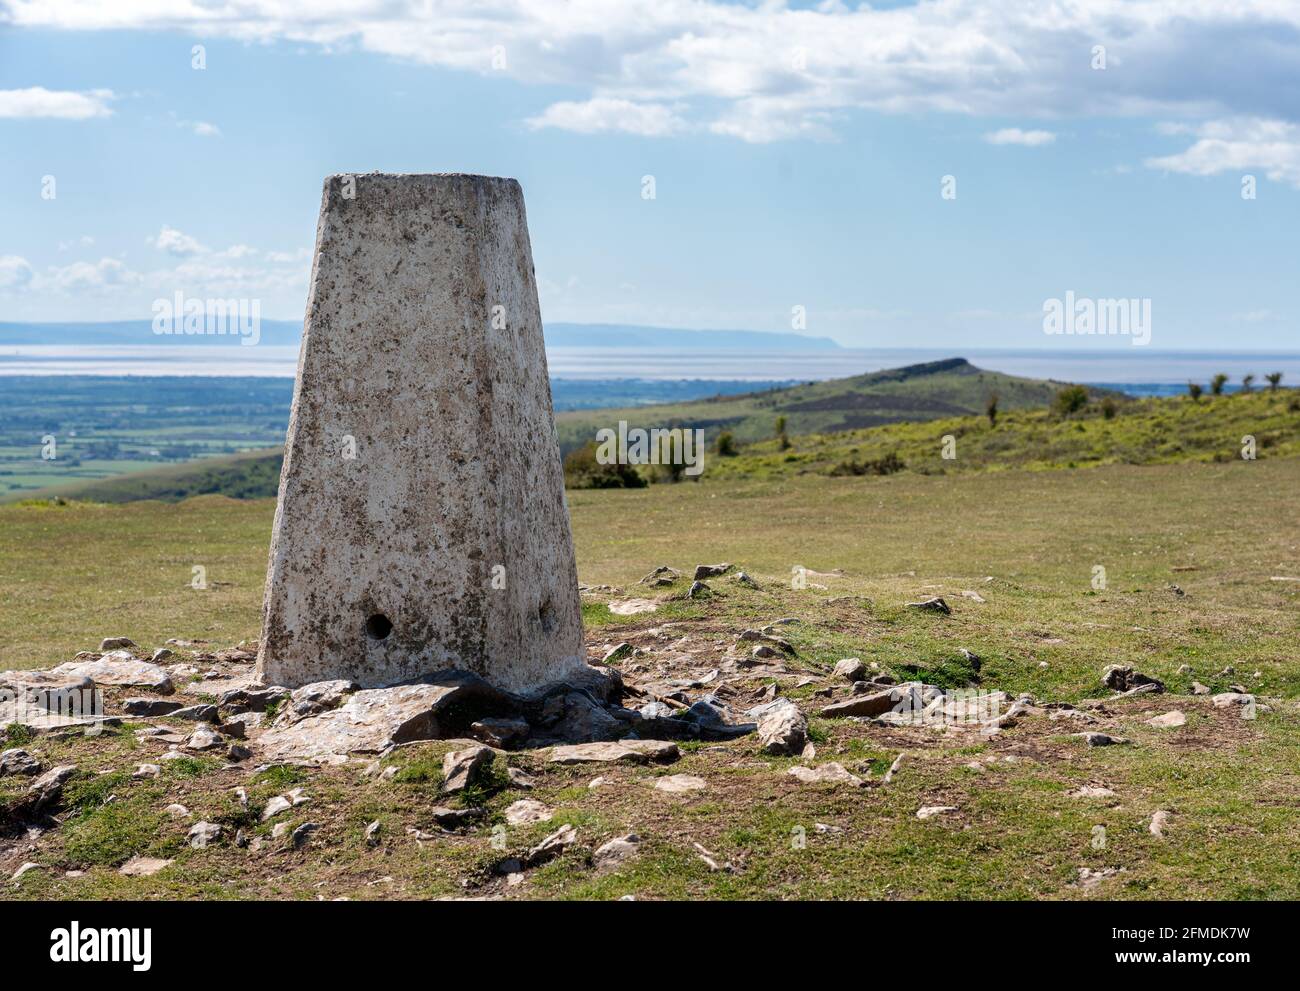 Trig point on Wavering Down in the Mendip HIlls of Somerset UK looking towards Crook peak and the Bristol Channel Stock Photo